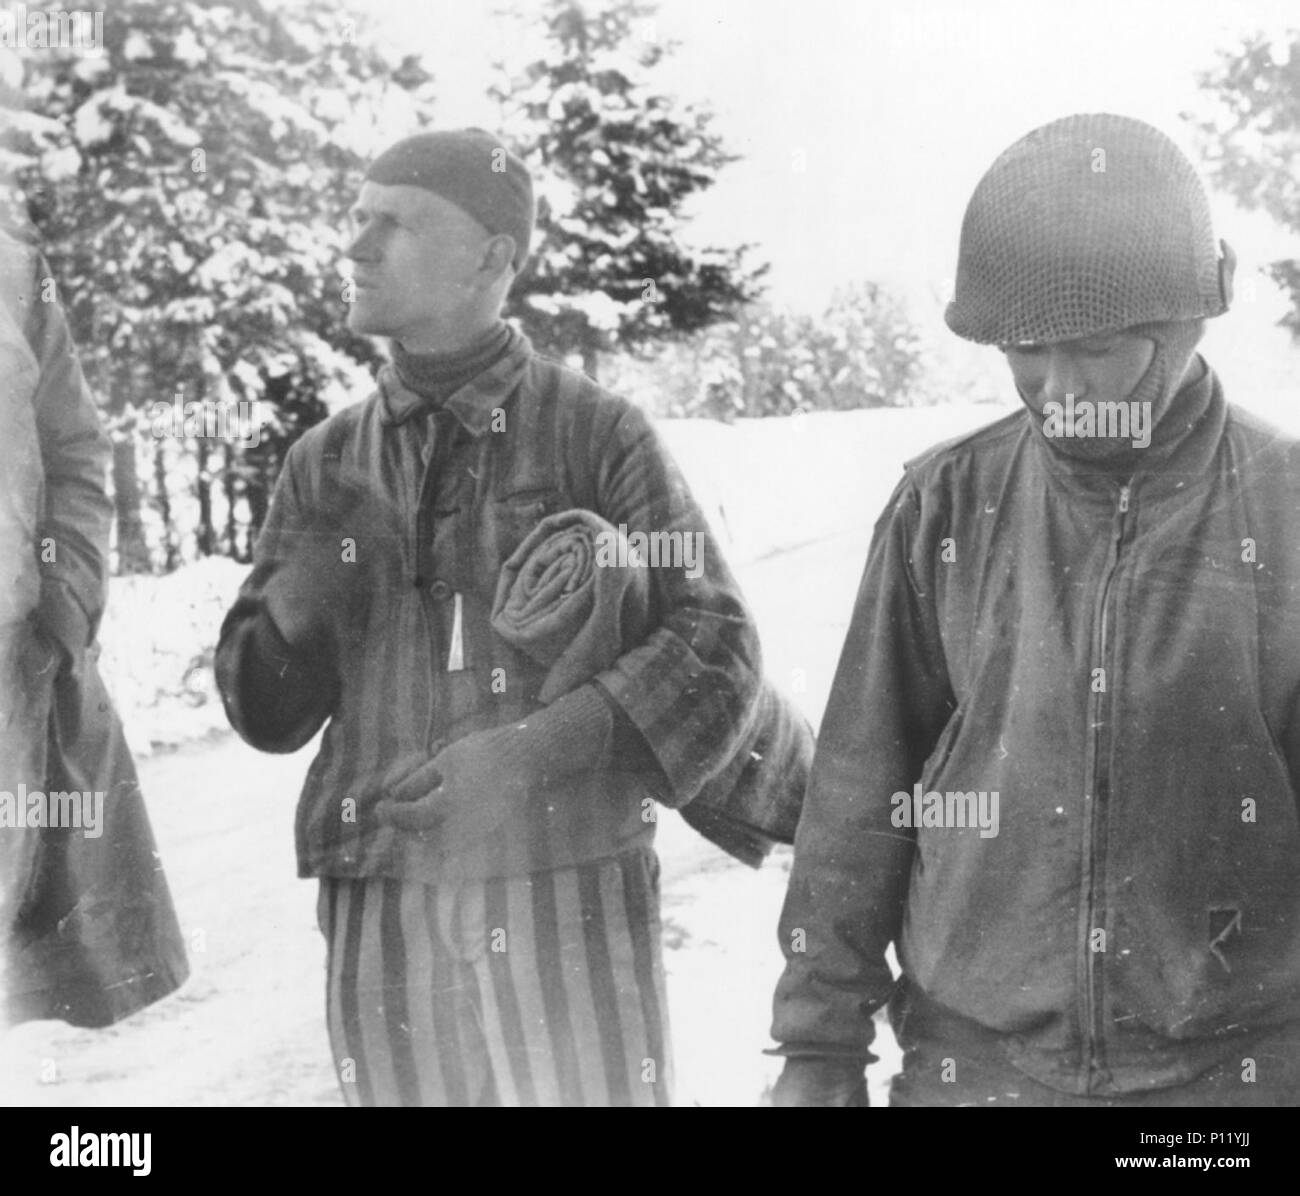 Tahae Sugita (right), a Japanese-American soldier with the 522nd Field Artillery battalion, stands next to a concentration camp survivor he has just liberated on a death march from Dachau in May 1945. Stock Photo